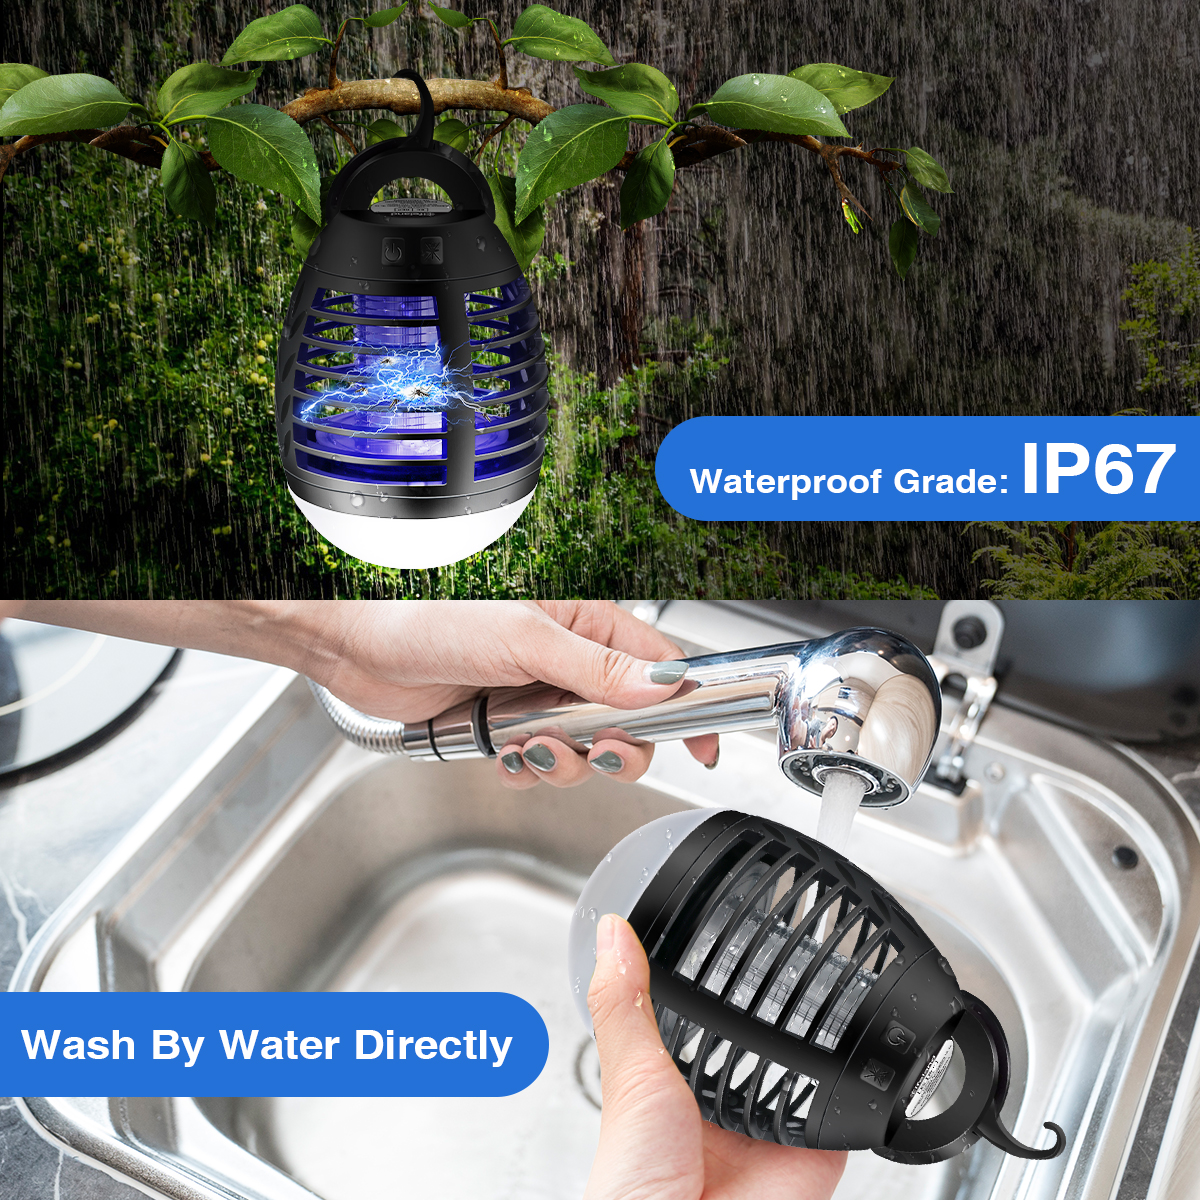 Elfeland-5W-Electric-Mosquito-Killer-Lamp-USB-Powered-Trap-Gnat-with-Hanger-for-Indoor-Outdoor-1710190-4